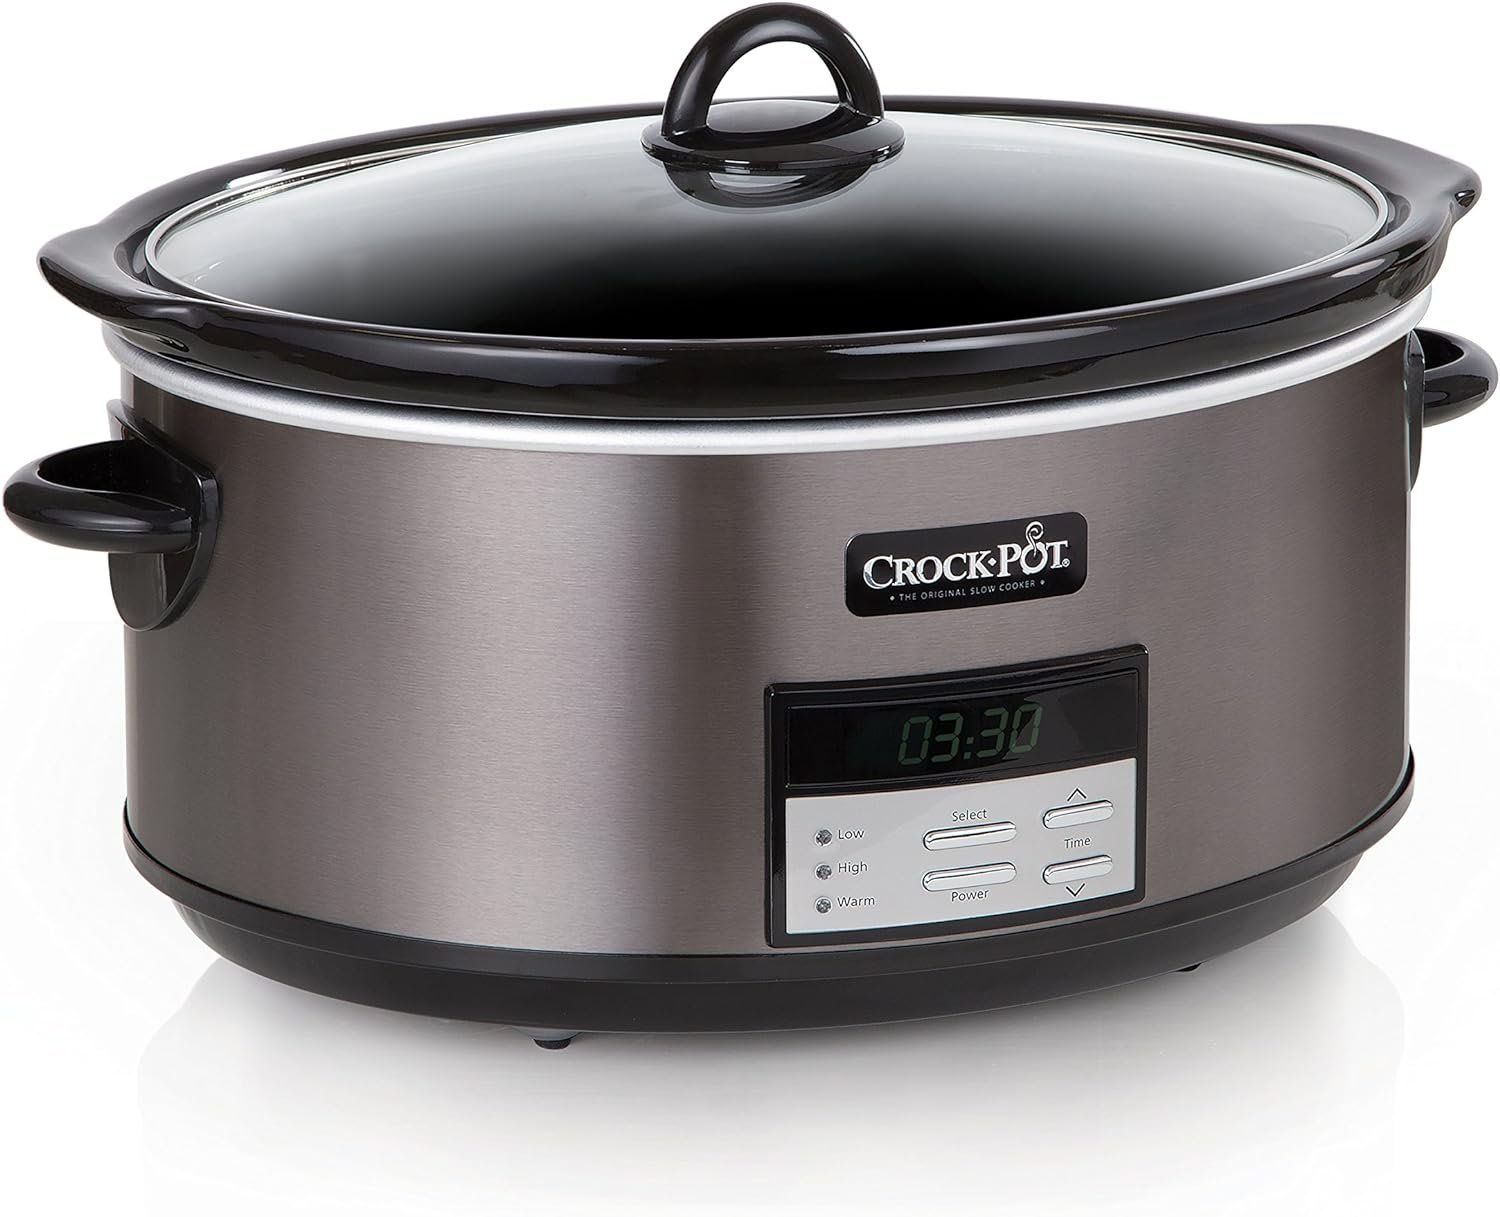 Crock-Pot Large 8 Quart Programmable Slow Cooker with Auto Warm Setting and Cookbook, Black Stainless Steel (Pack of 1)